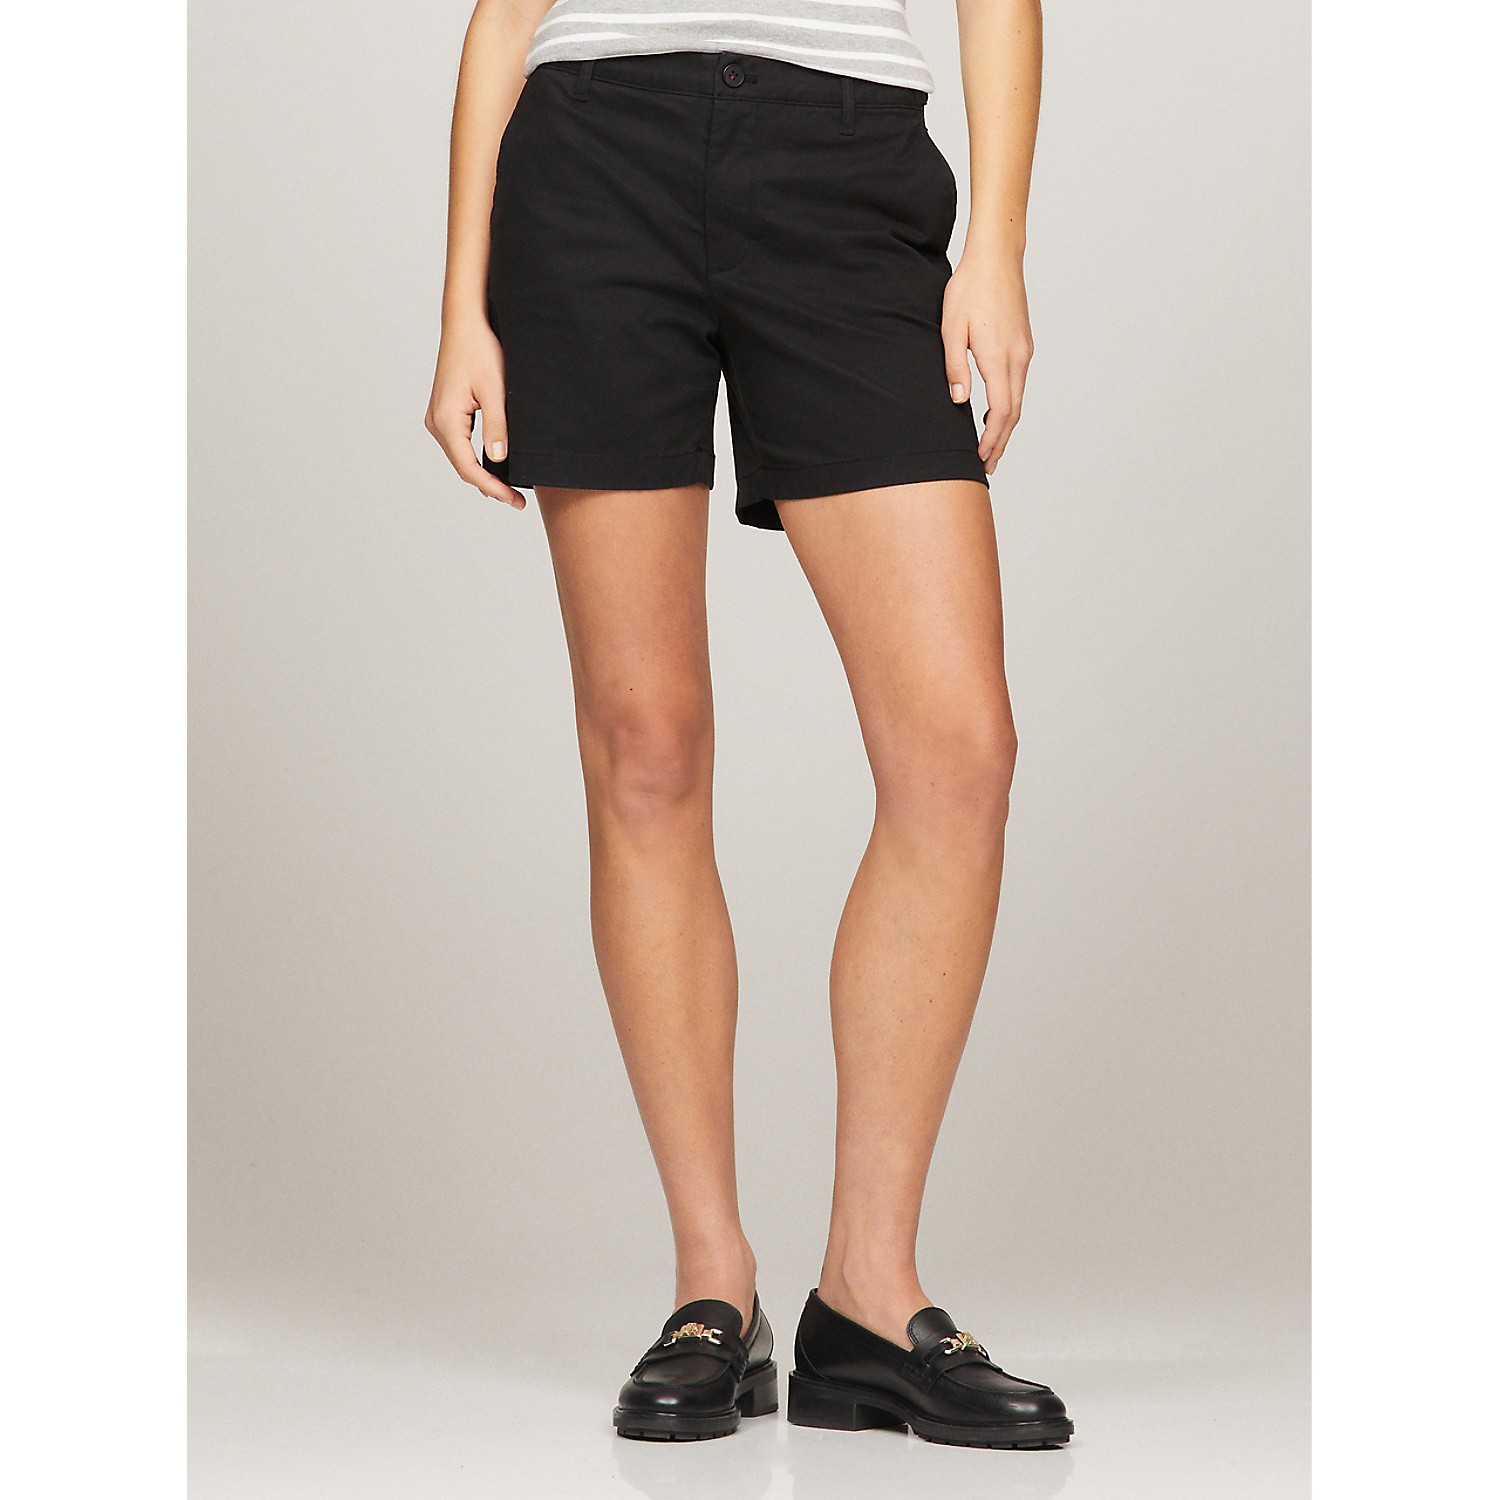 TOMMY HILFIGER Classic Solid 5 Short